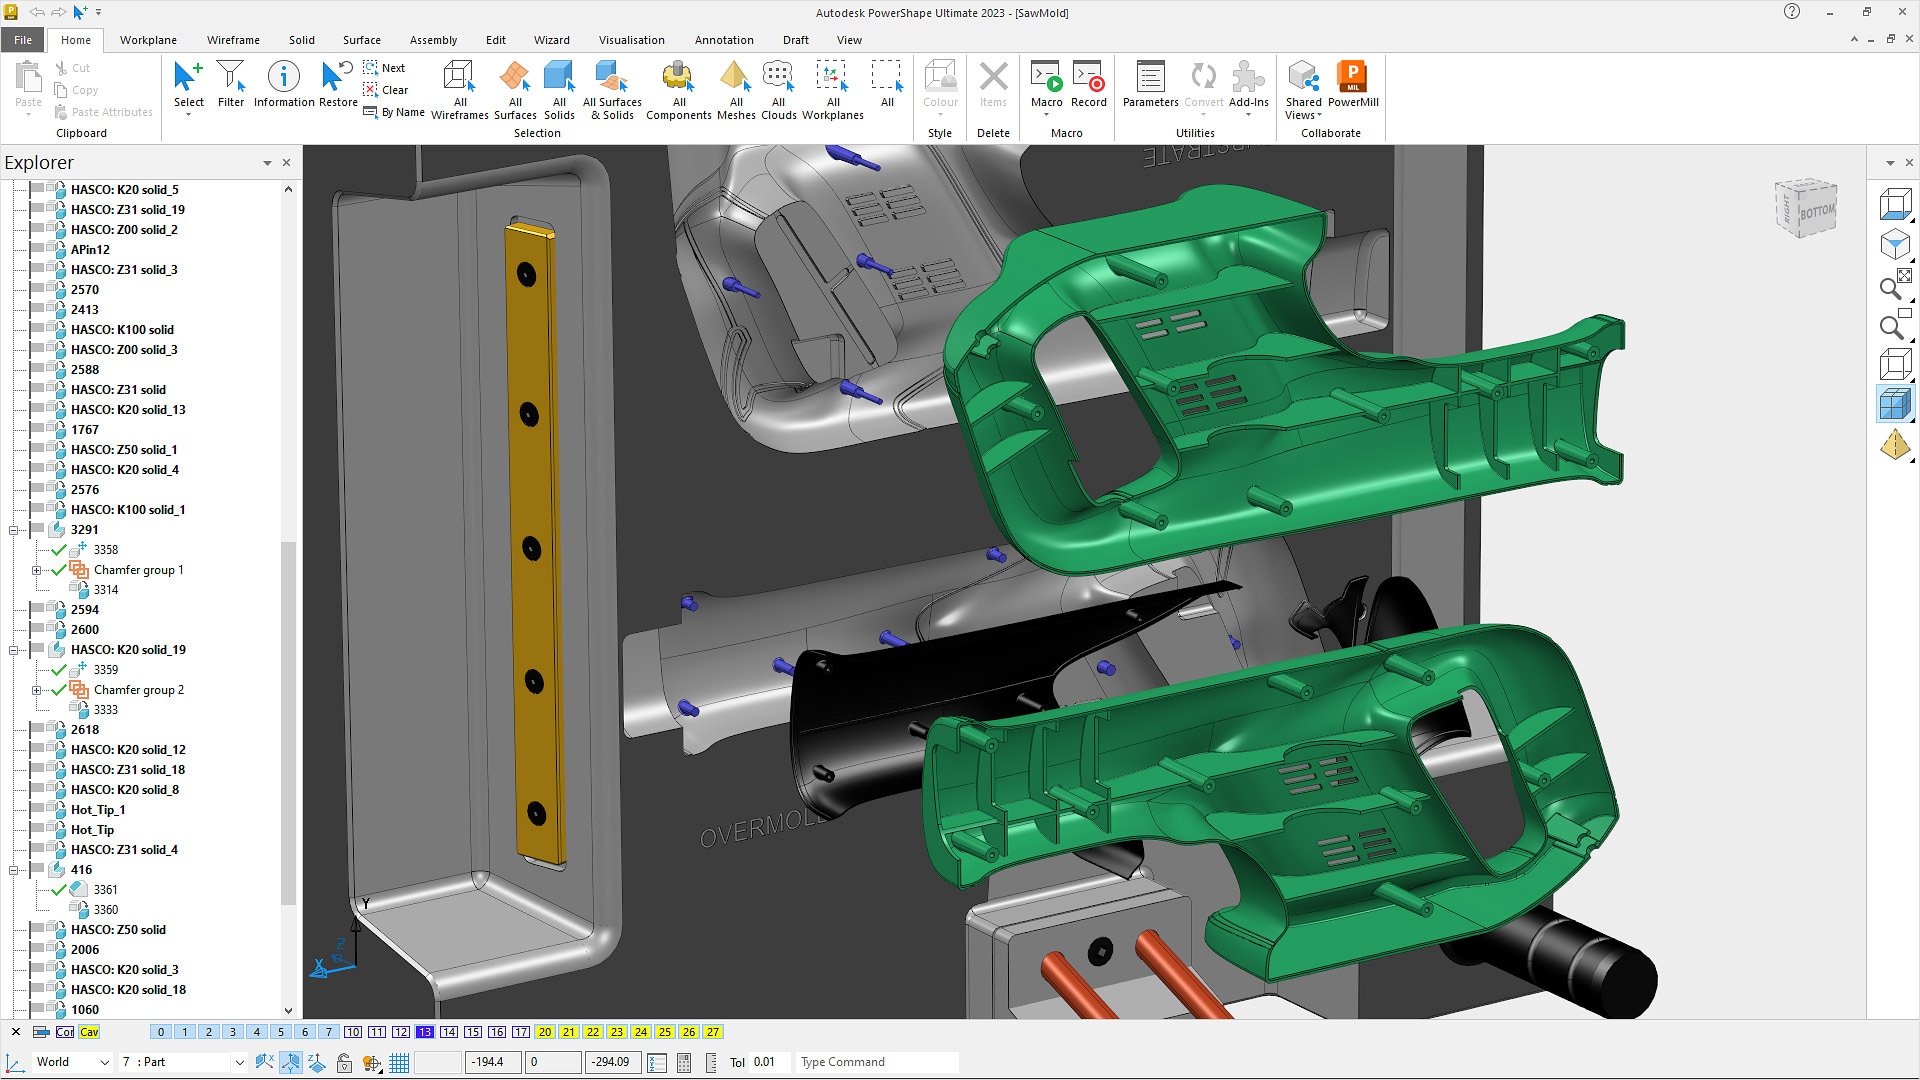 PowerShape interface showing the core plate from an injection mold tool